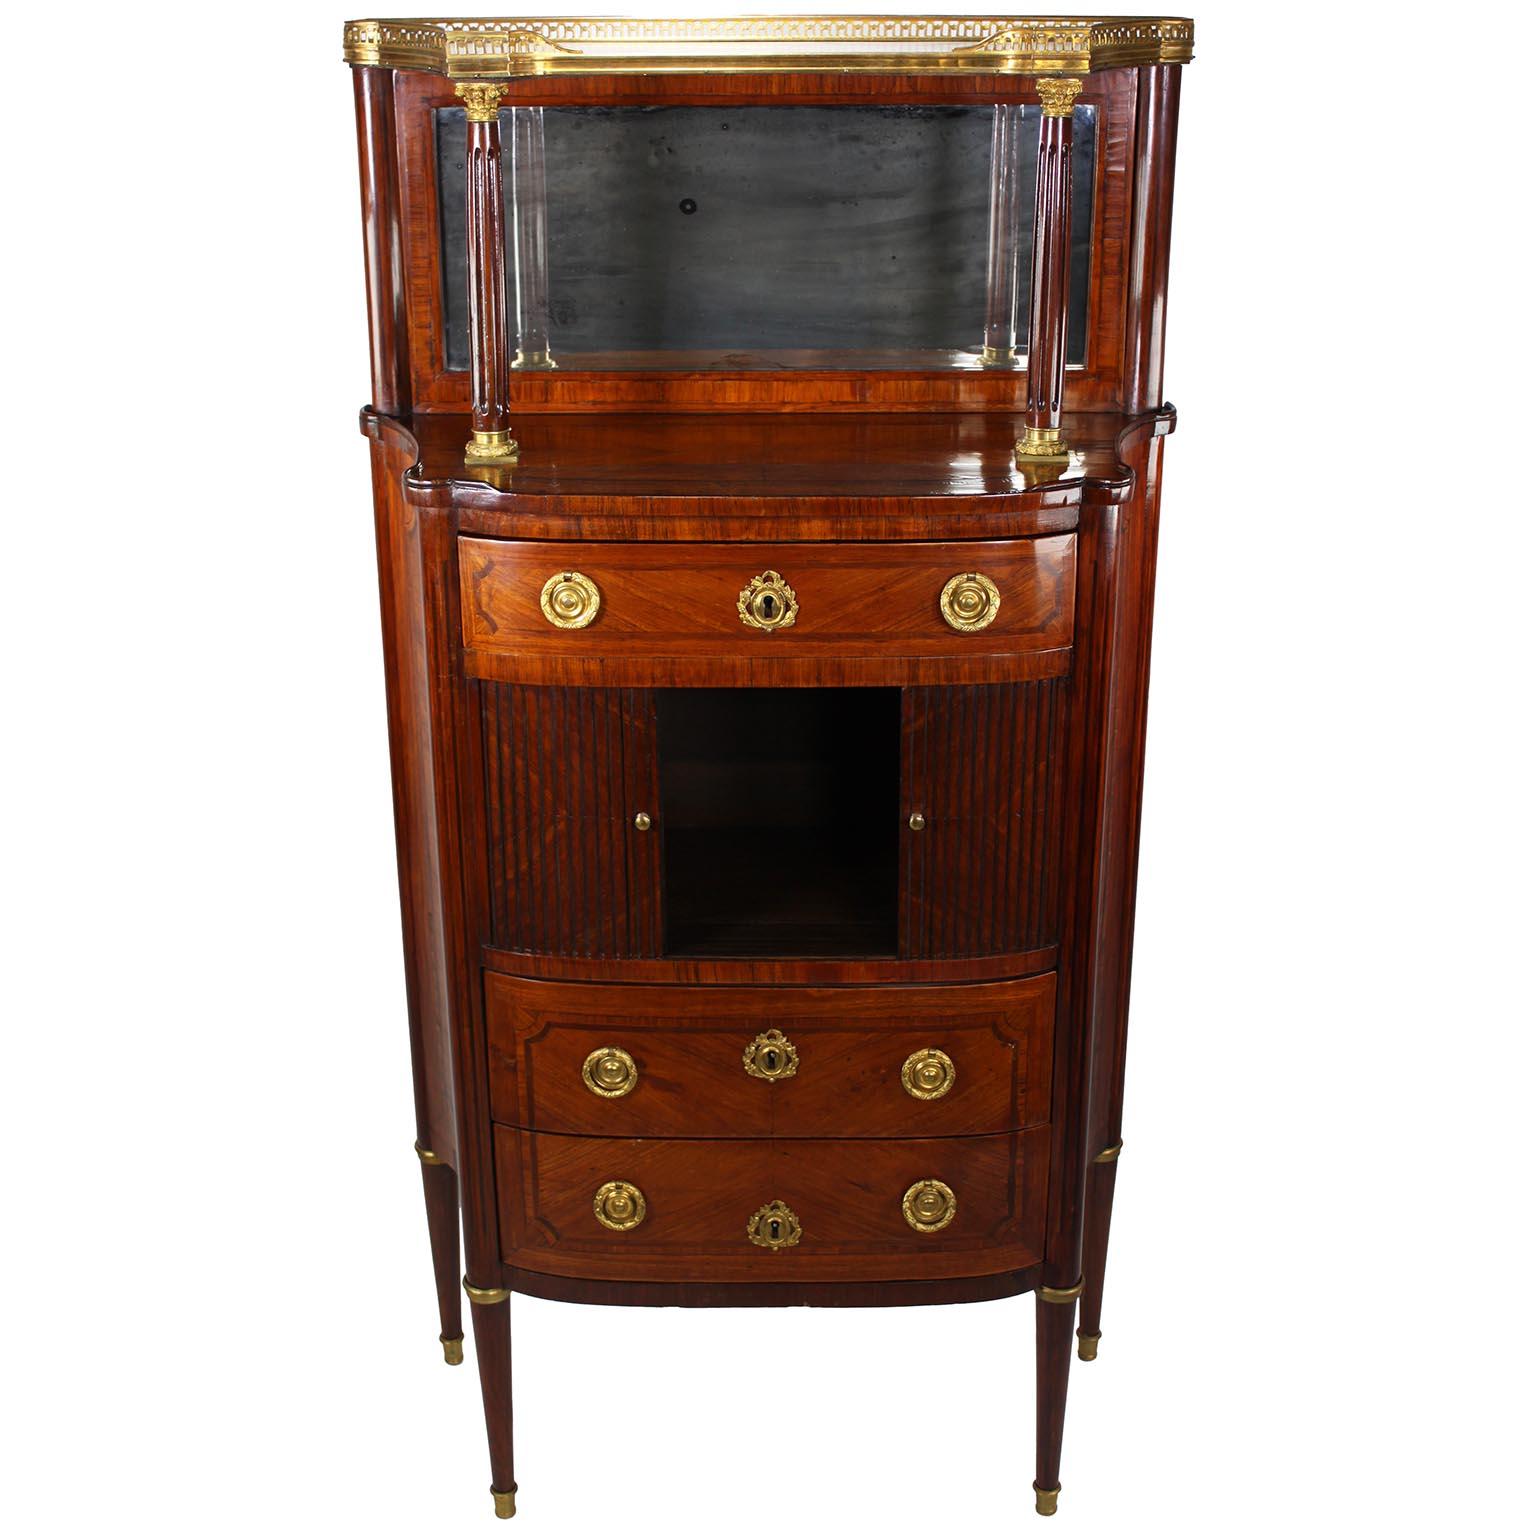 A French 19th Century Louis XVI Style Gilt-Bronze Mounted Meuble d'Appui Cabinet For Sale 3